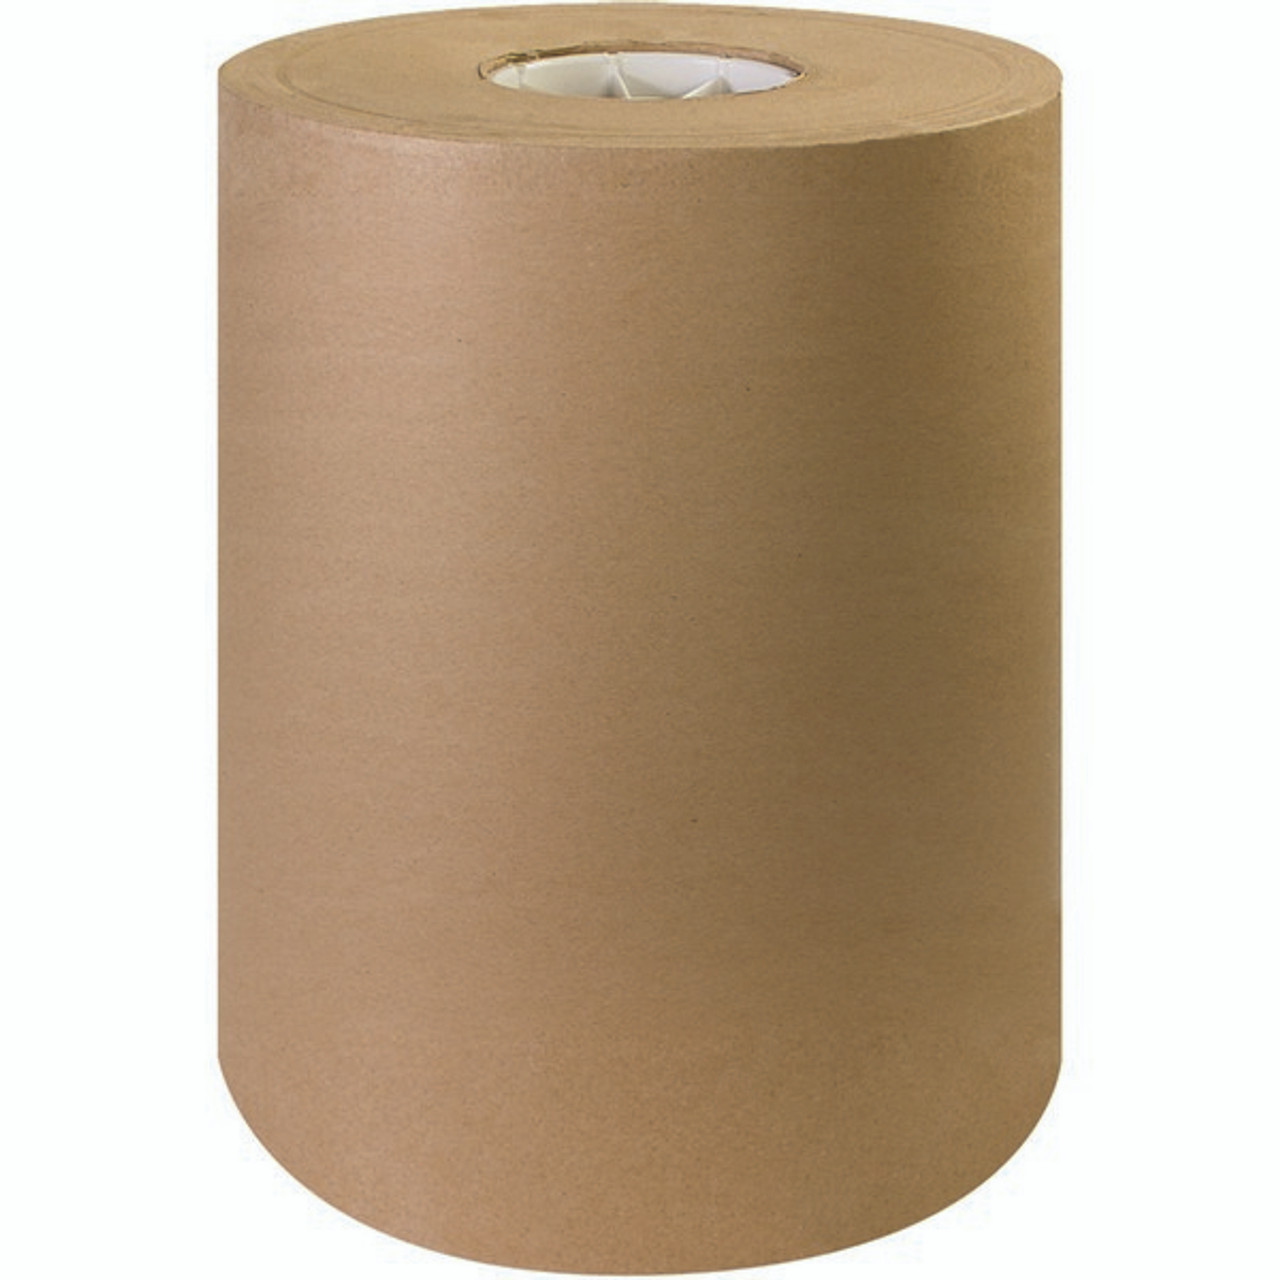 American Made 100% Recycled Brown Kraft Paper Roll 17.50 x 1800